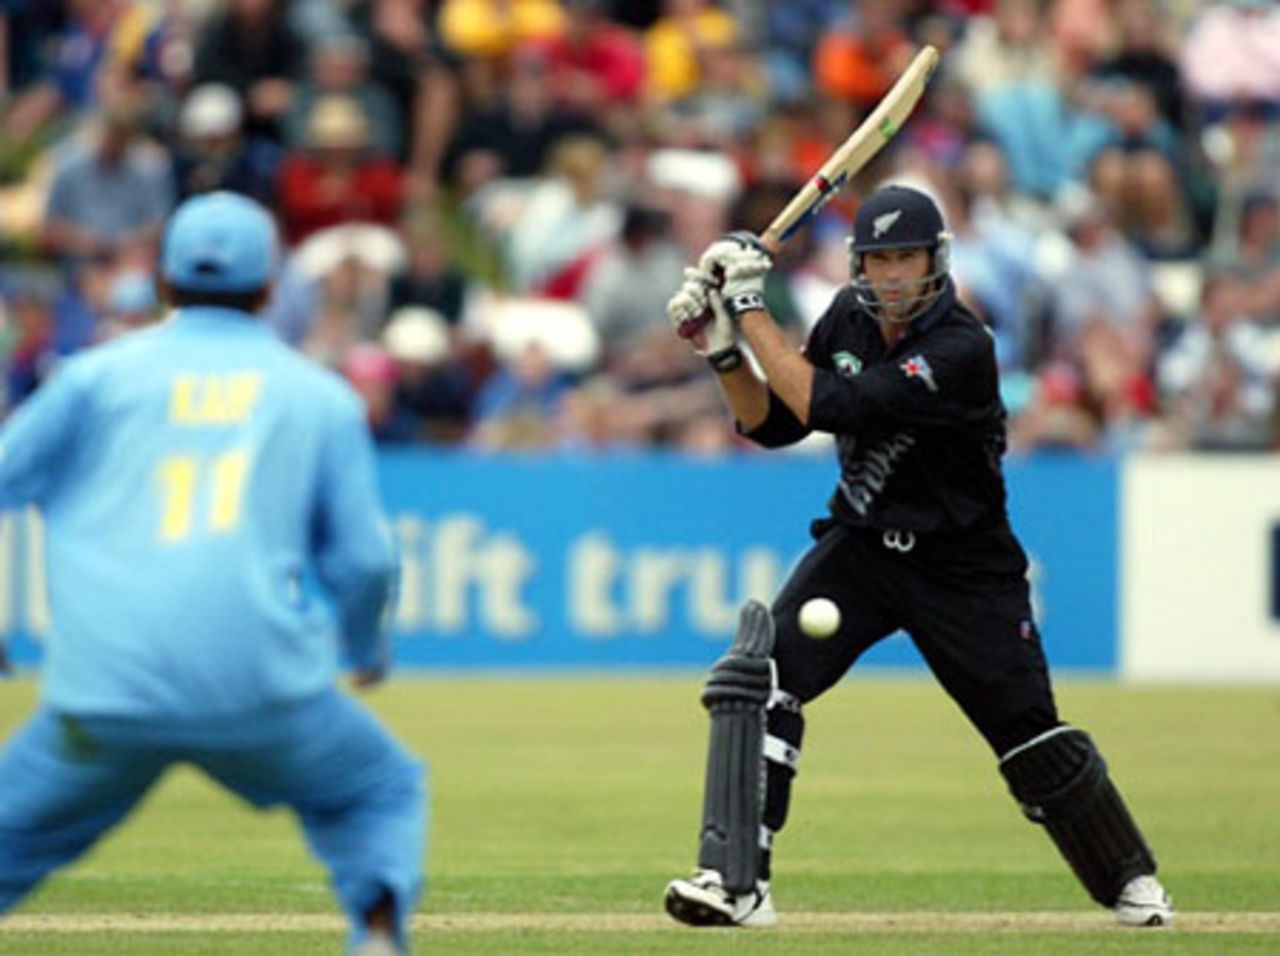 New Zealand batsman Stephen Fleming drives a delivery straight to Indian fielder Mohammad Kaif during his innings of 47. 4th ODI: New Zealand v India at John Davies Oval, Queenstown, 4 January 2003.